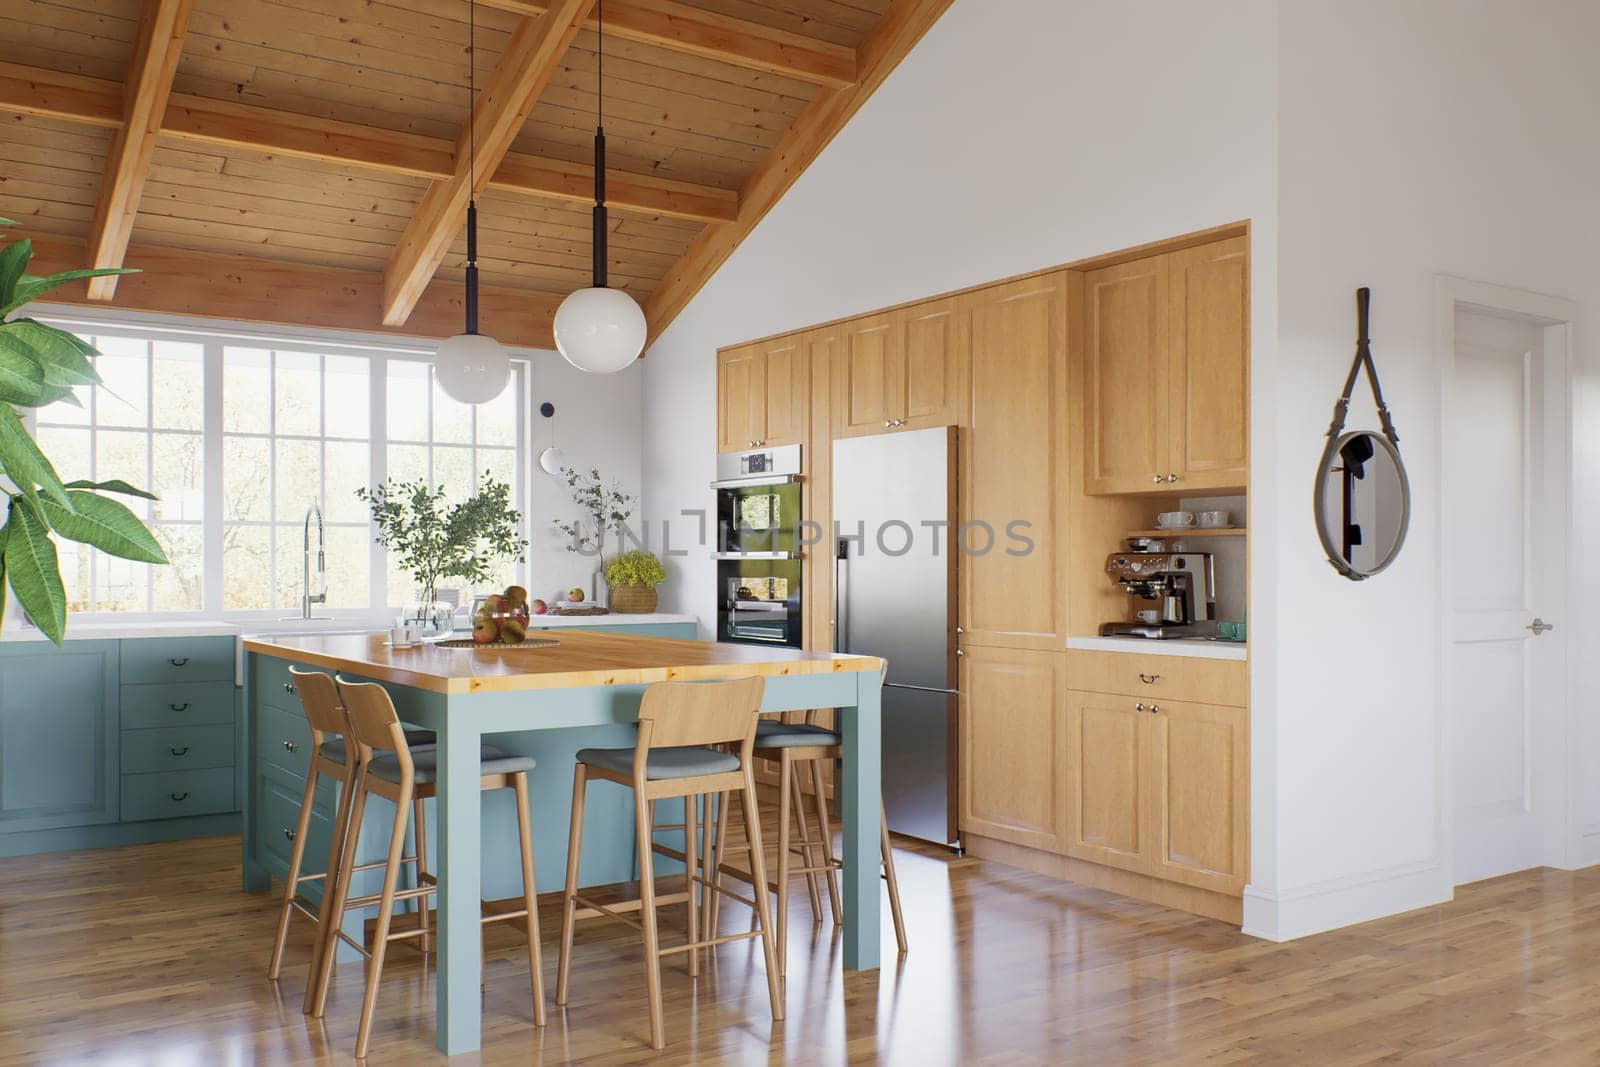 Large U-shaped green kitchen with island and wooden countertop. Kitchen interior with high ceiling and wood in the interior. 3d rendering.